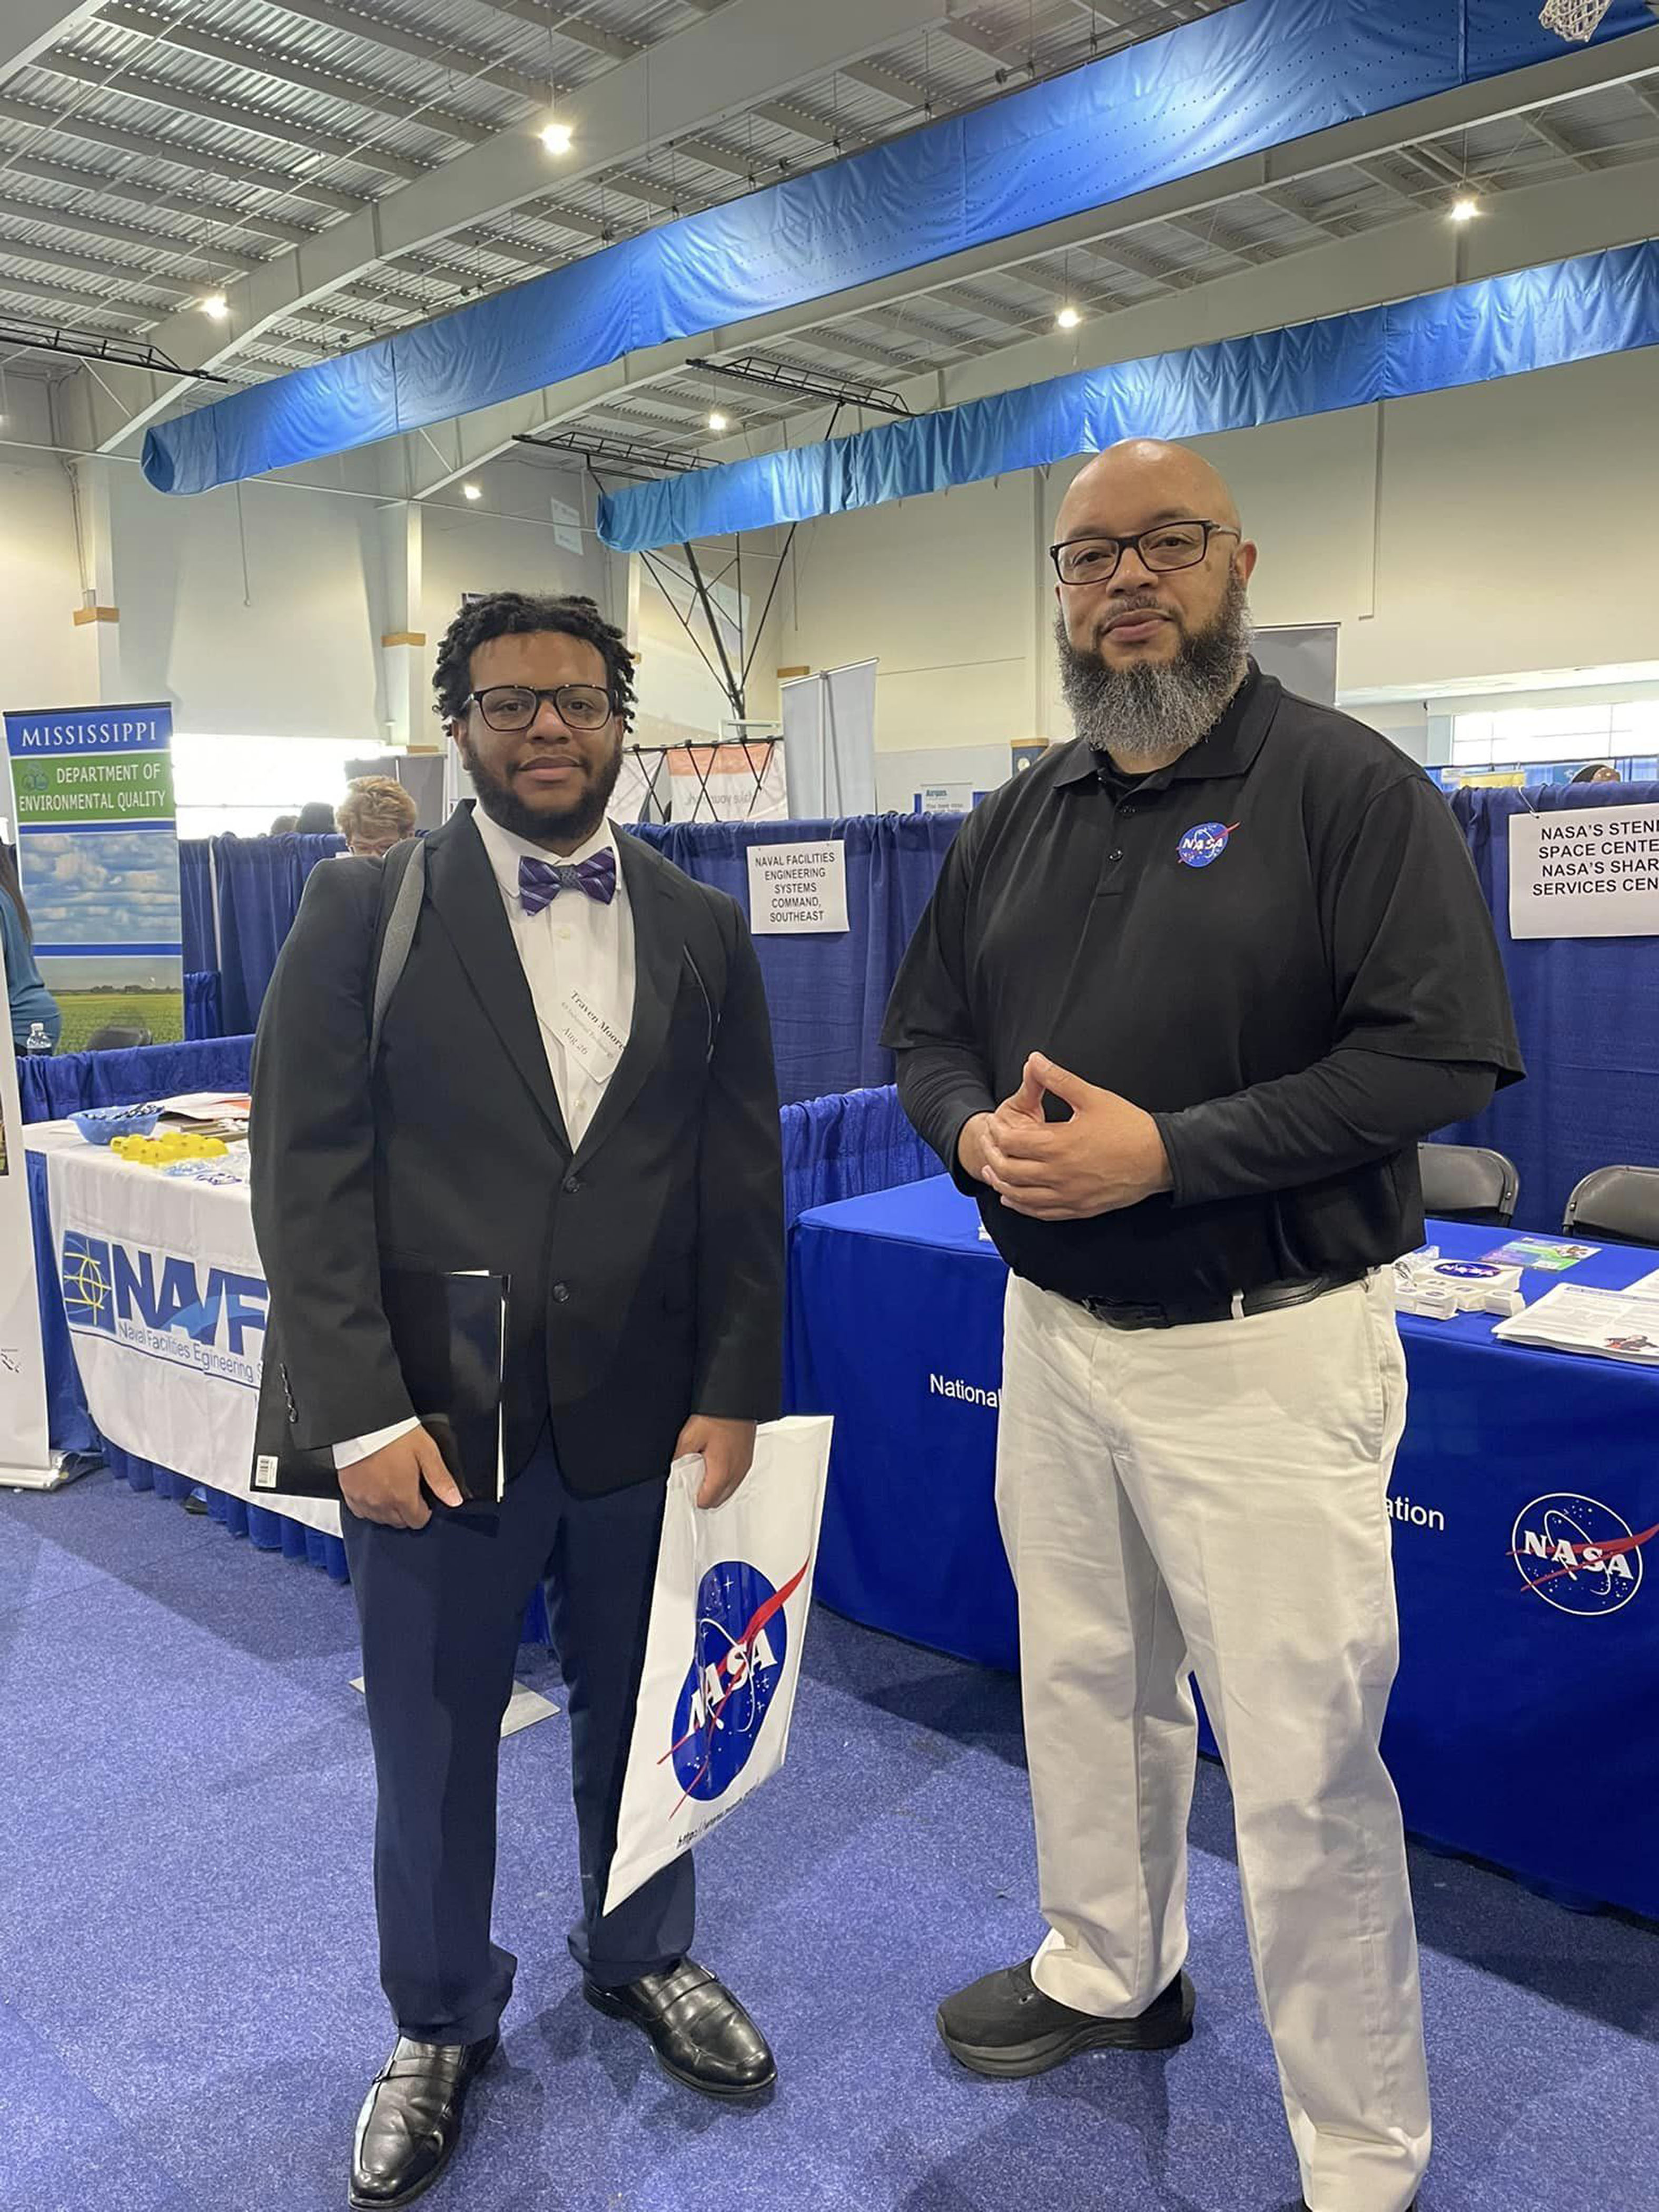 two men pose for photo in front of the NASA table at the career expo event